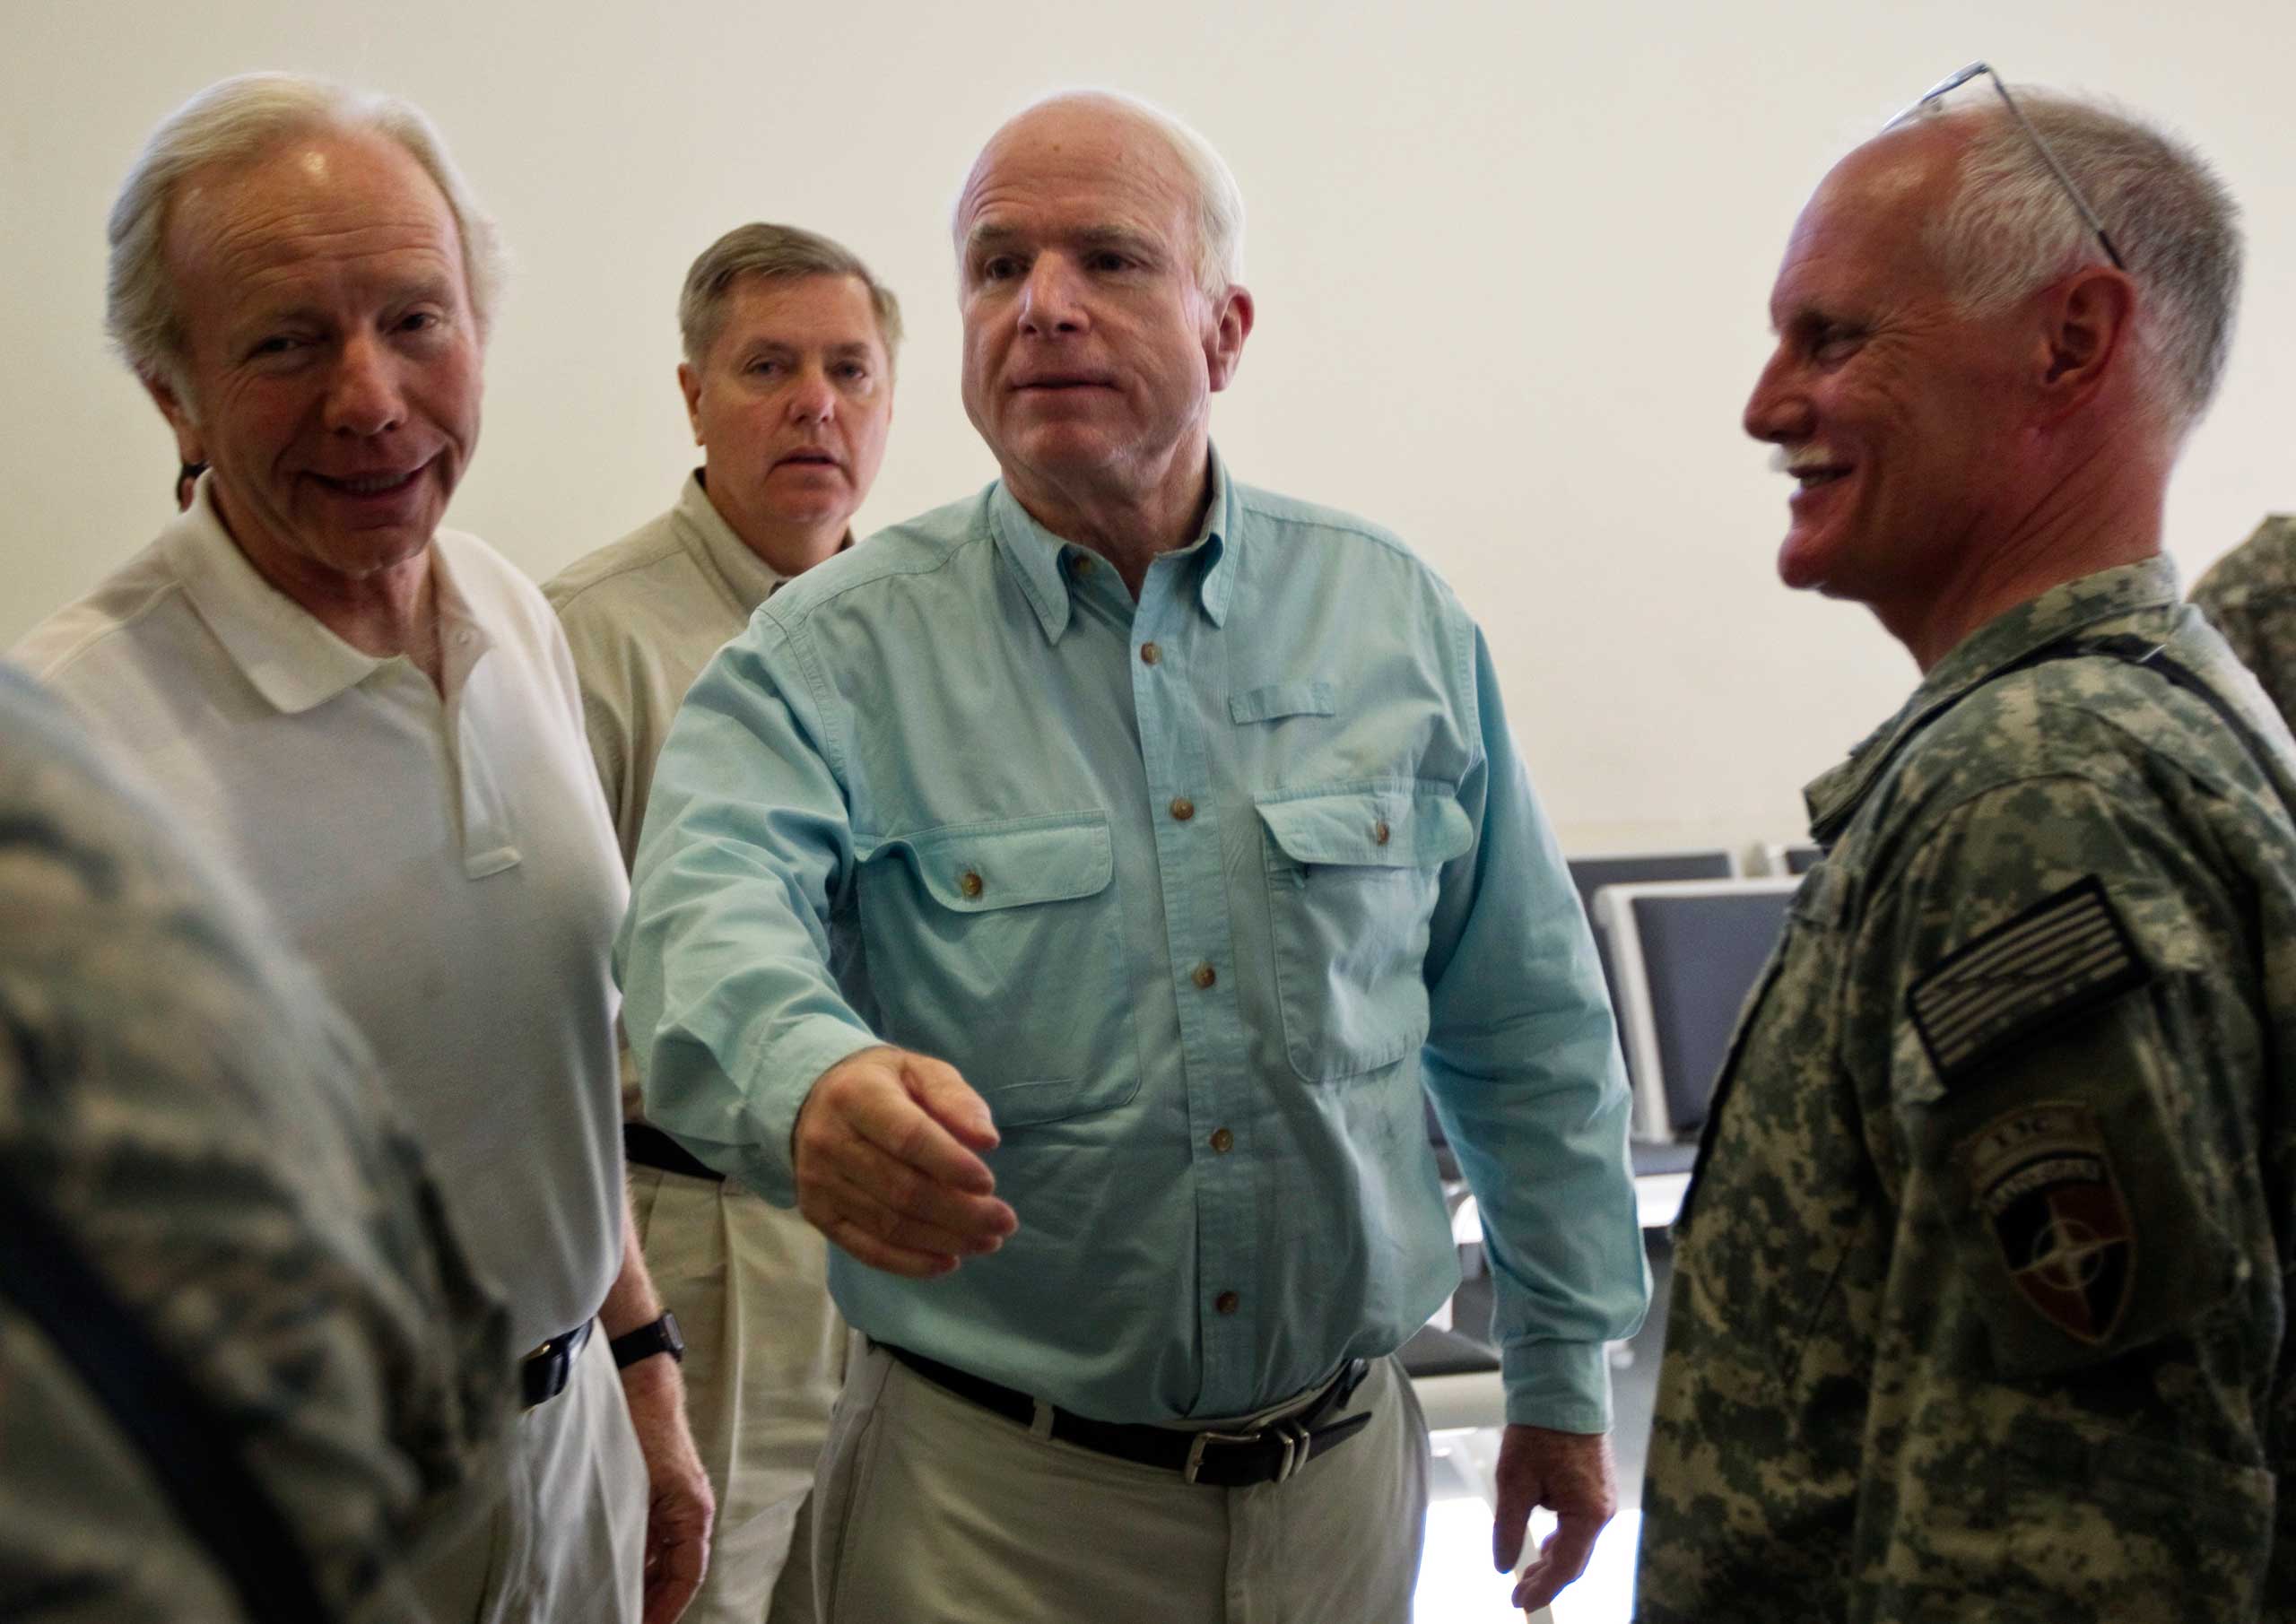 Though Lieberman is a Democrat-turned-independent and Graham and McCain are Republicans, the three Senators, shown here on a 2010 trip to Afghanistan, share similar views on a muscular foreign policy.